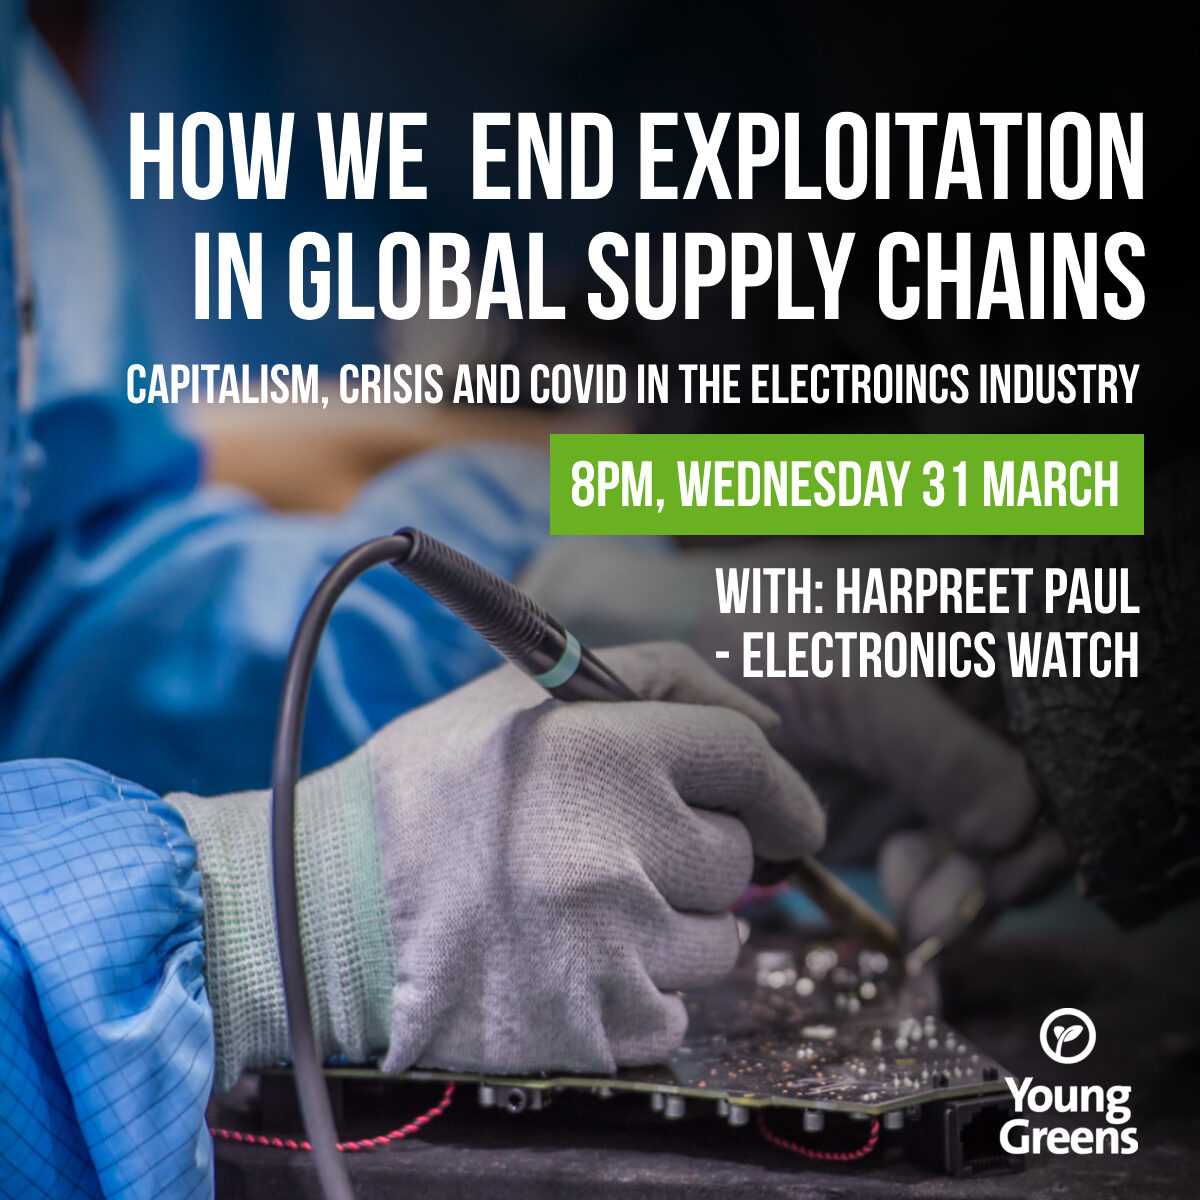 How we end exploitation in global supply chains